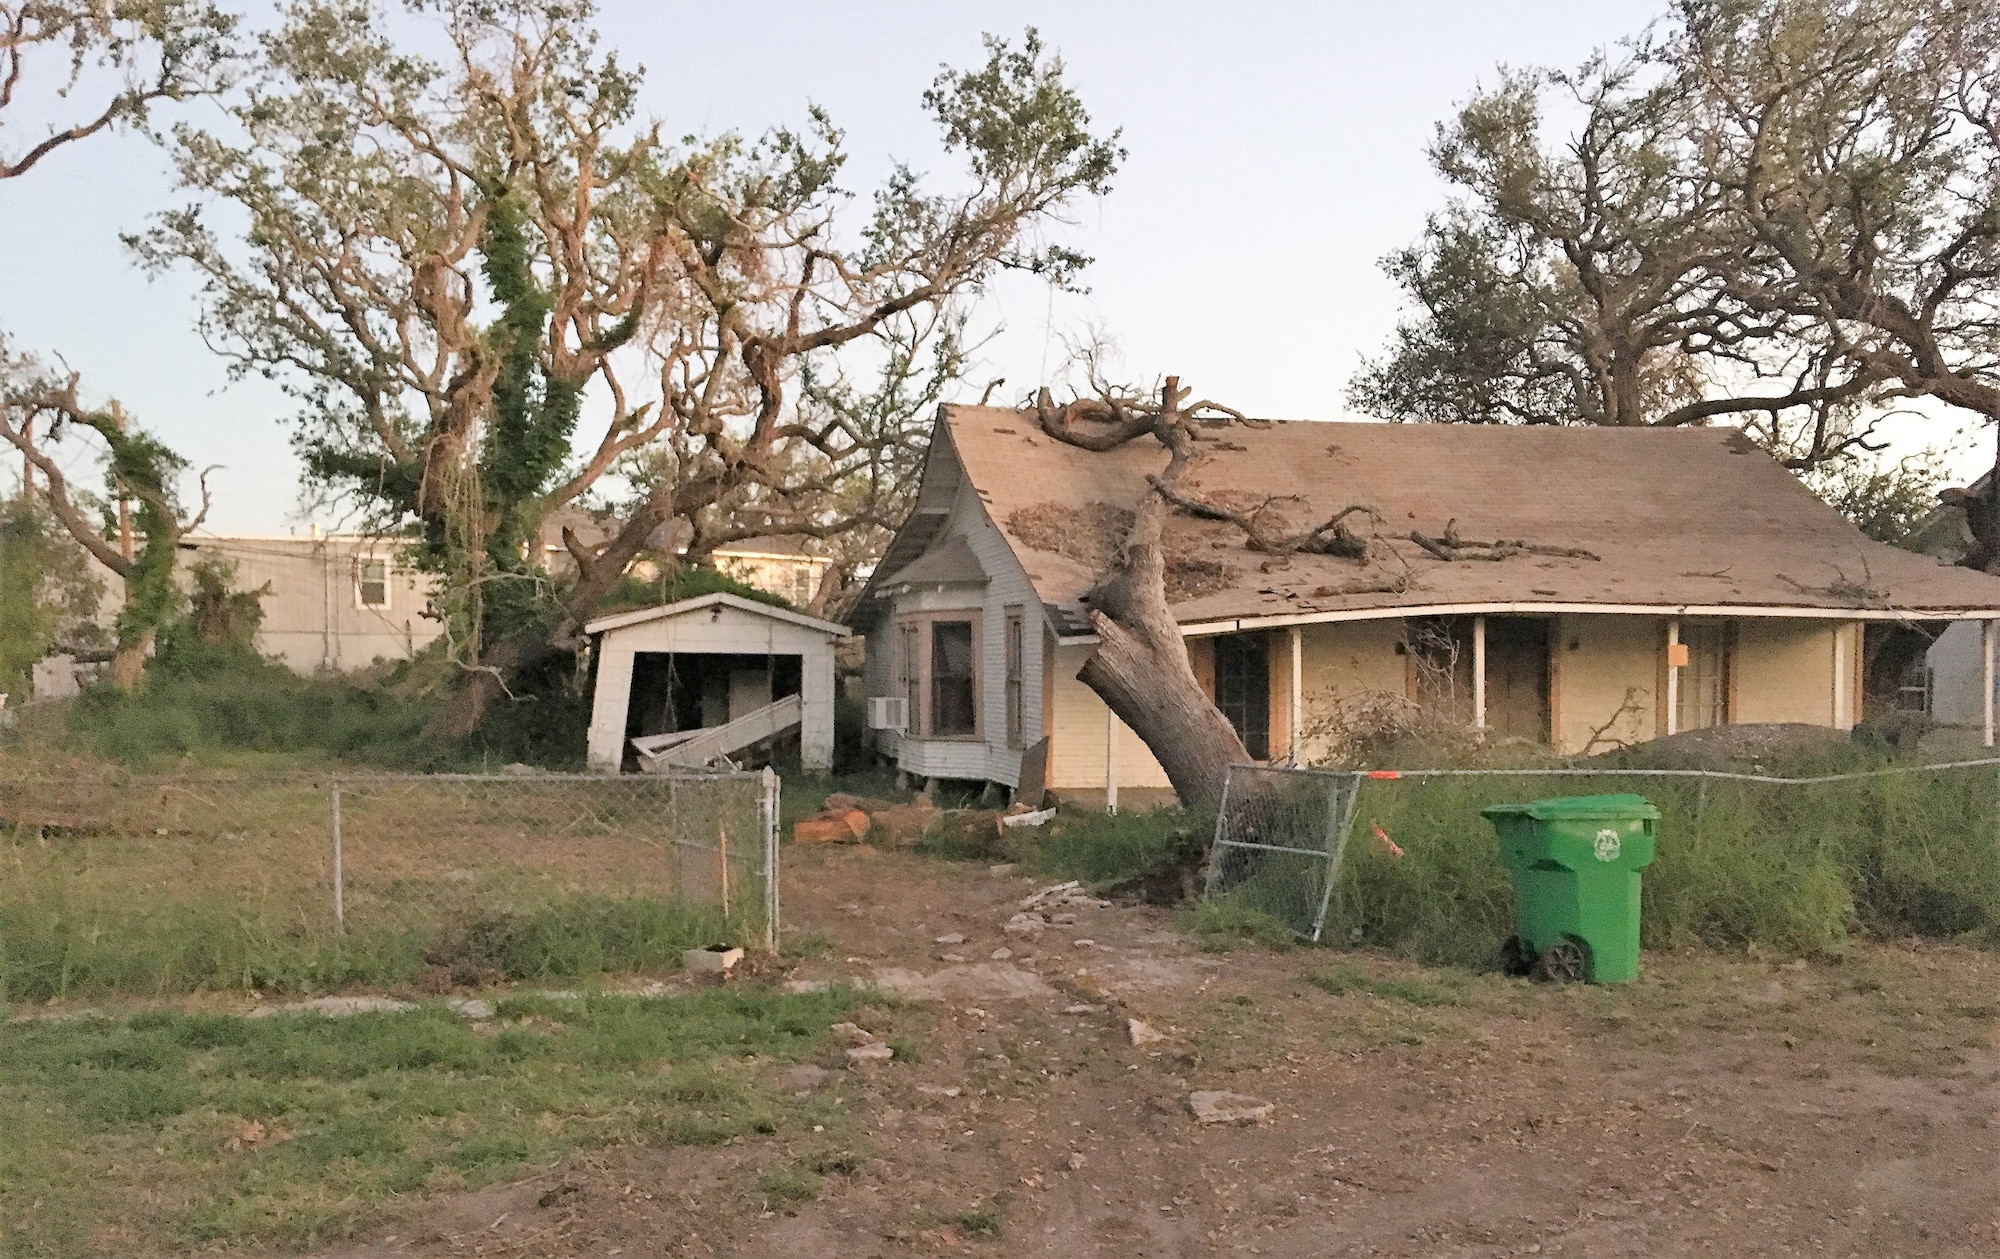 Most homes in Aransas Pass were seriously damaged, inside and out, by Hurricane Harvey in August 2017. Volunteers, like those from the 96th Flying Training Squadron, Laughlin Air Force Base, Texas, spent days, weeks, and months helping remove debris and restore homes like this one. (U.S. Air Force photo Maj. Jacob Hostetler, 96th FTS)